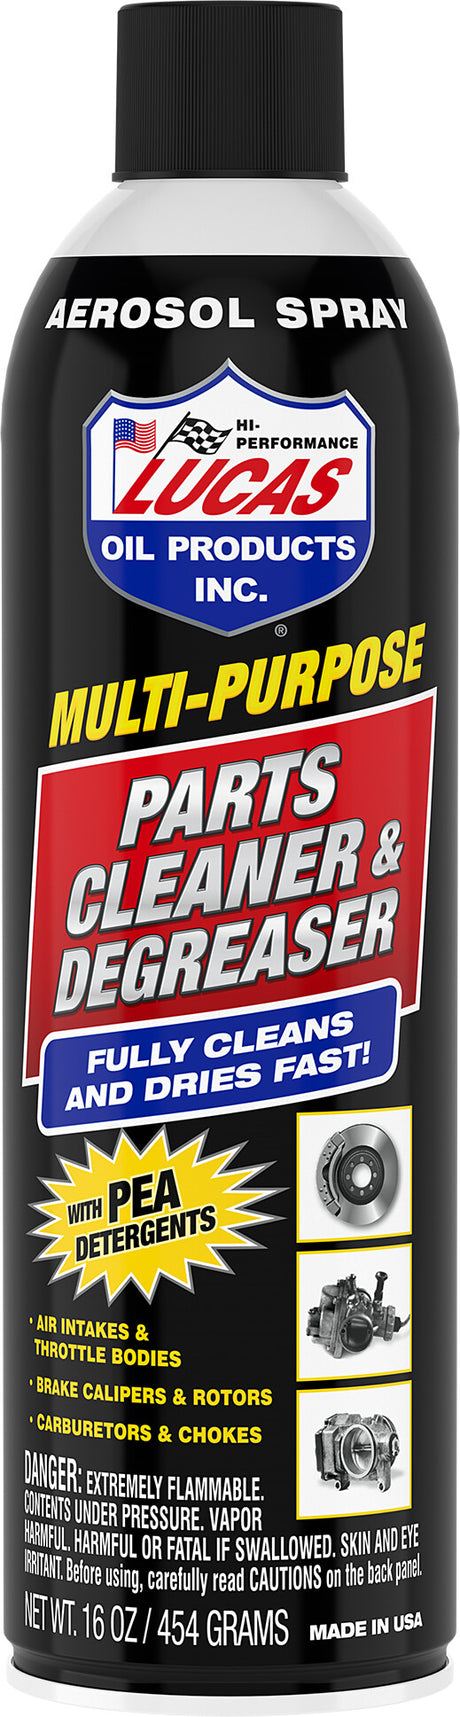 PARTS CLEANER AND DEGREASER 16OZ 12/CASE